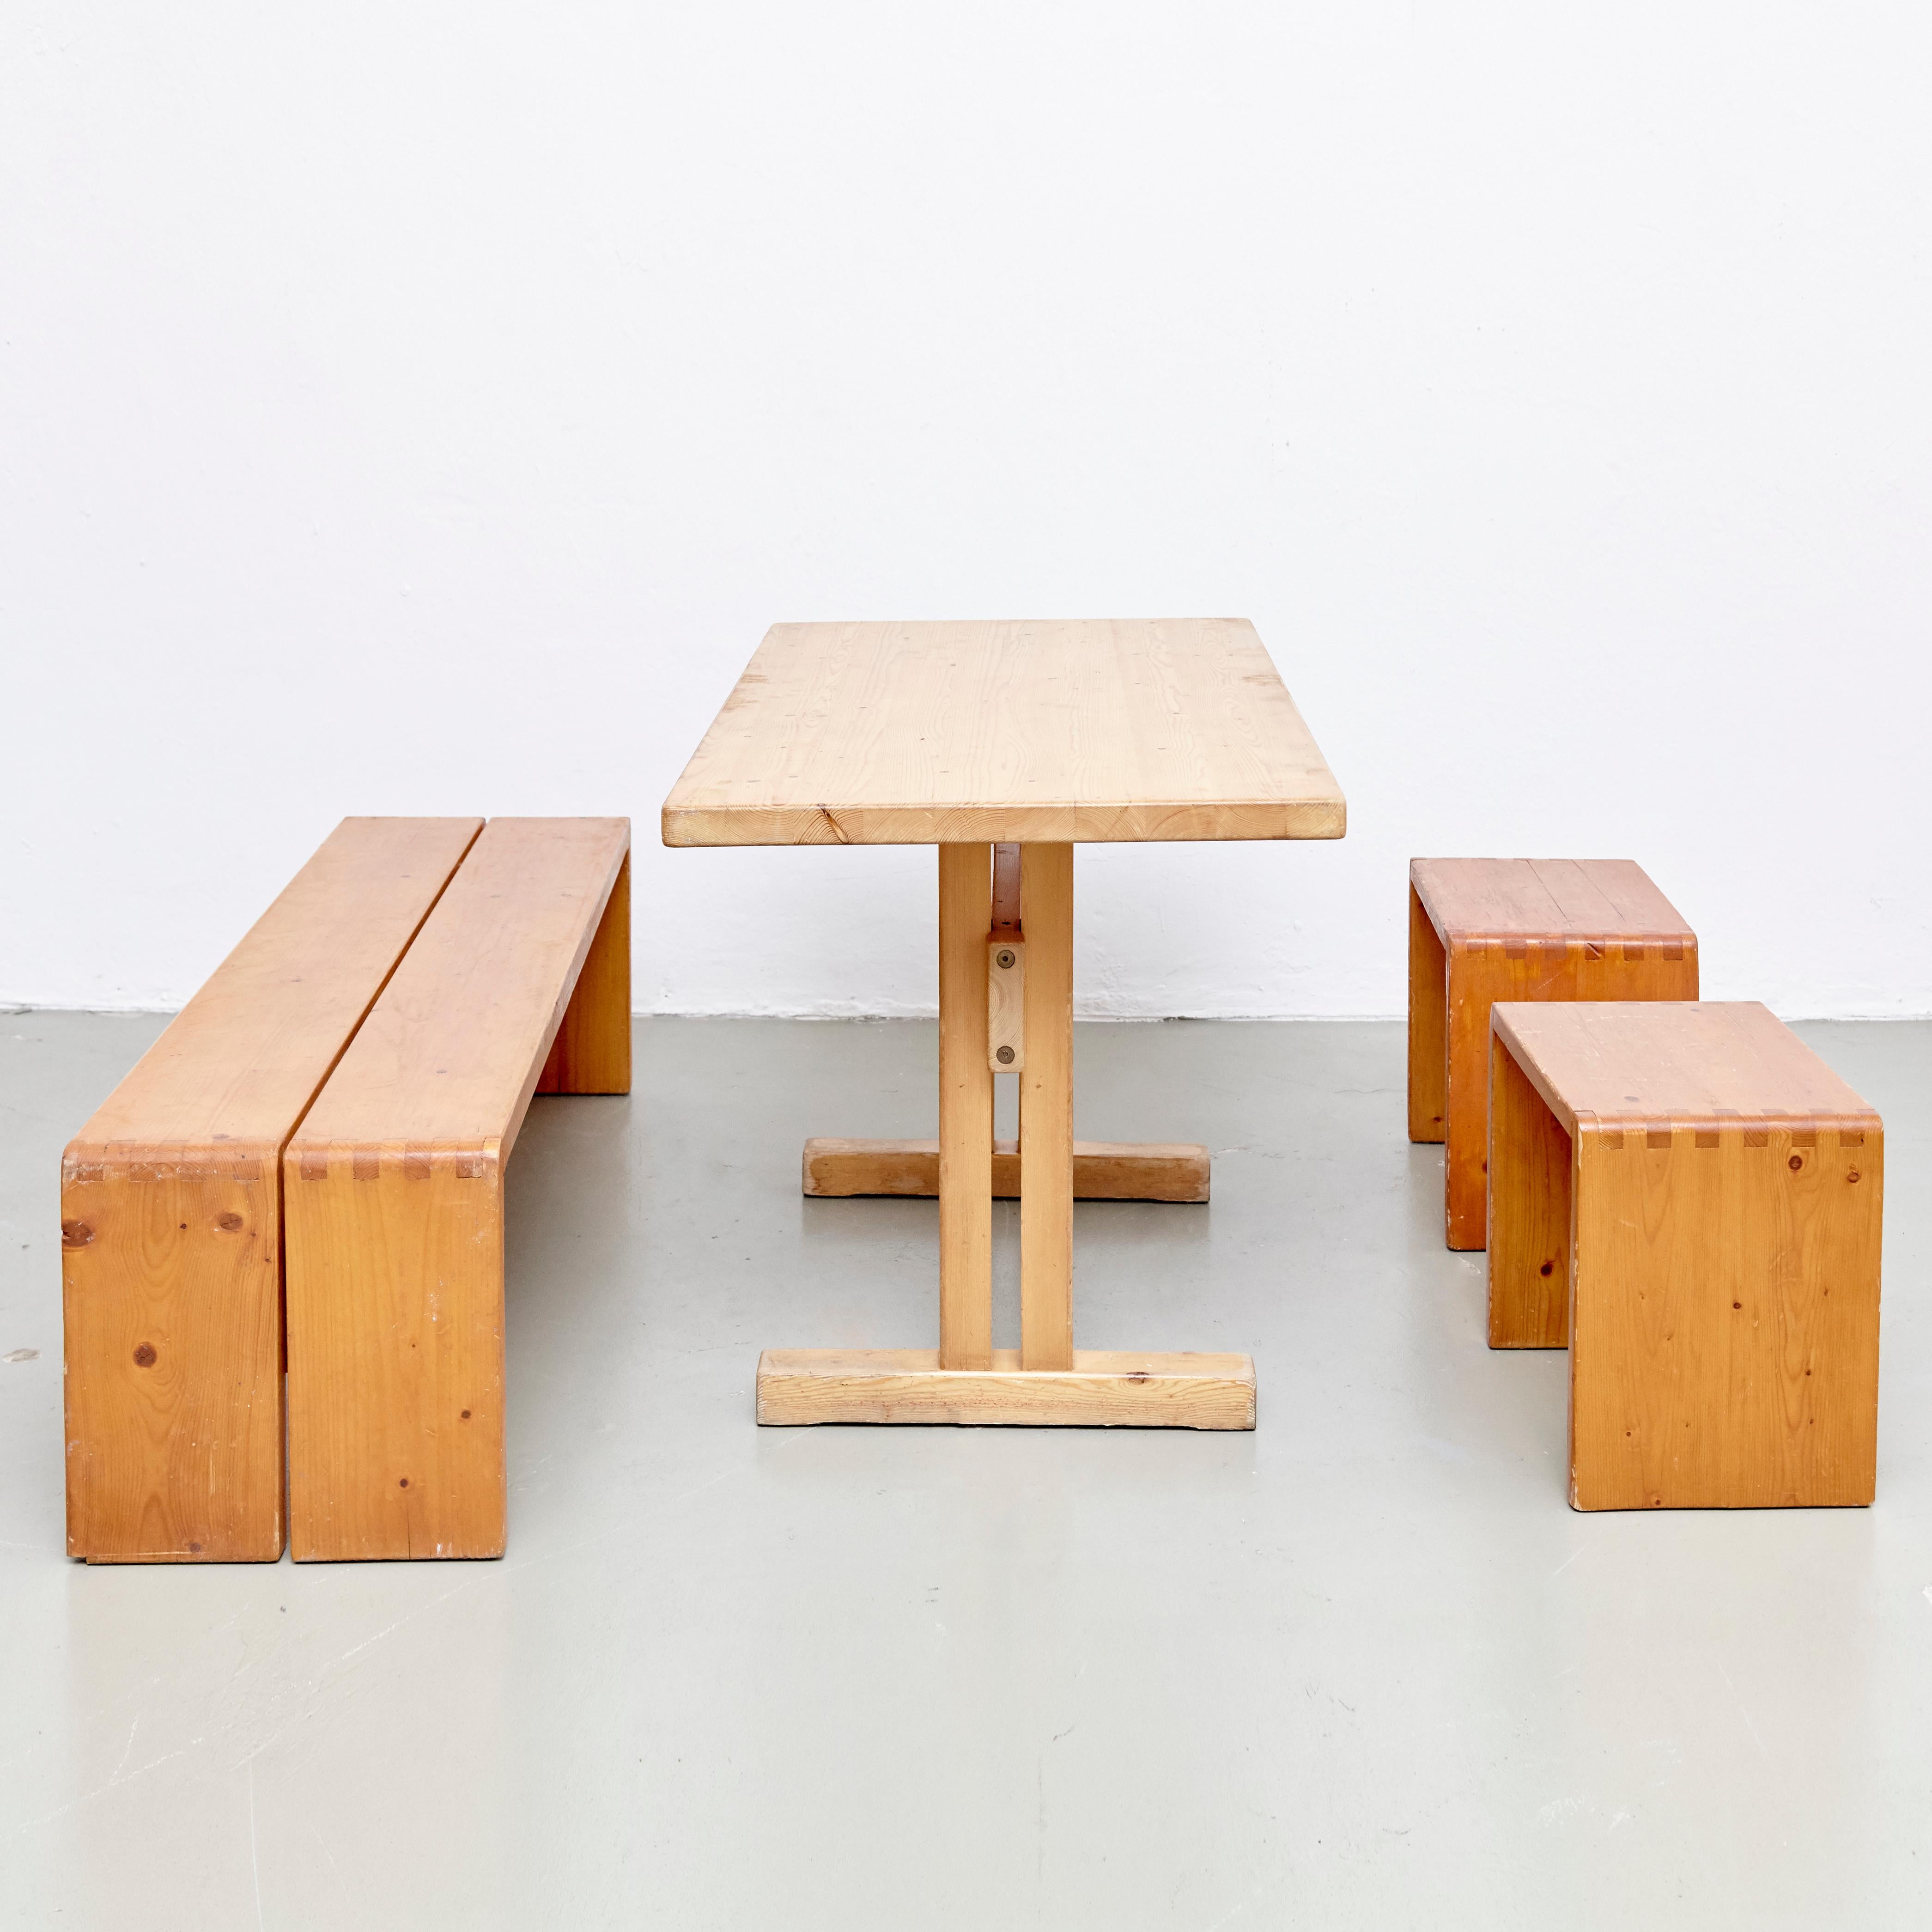 Set of table, stools and bench designed by Charlotte Perriand for Les Arcs ski resort, circa 1960, manufactured in France.

Pinewood.

In original condition, with minor wear consistent with age and use, preserving a beautiful patina.

Table: